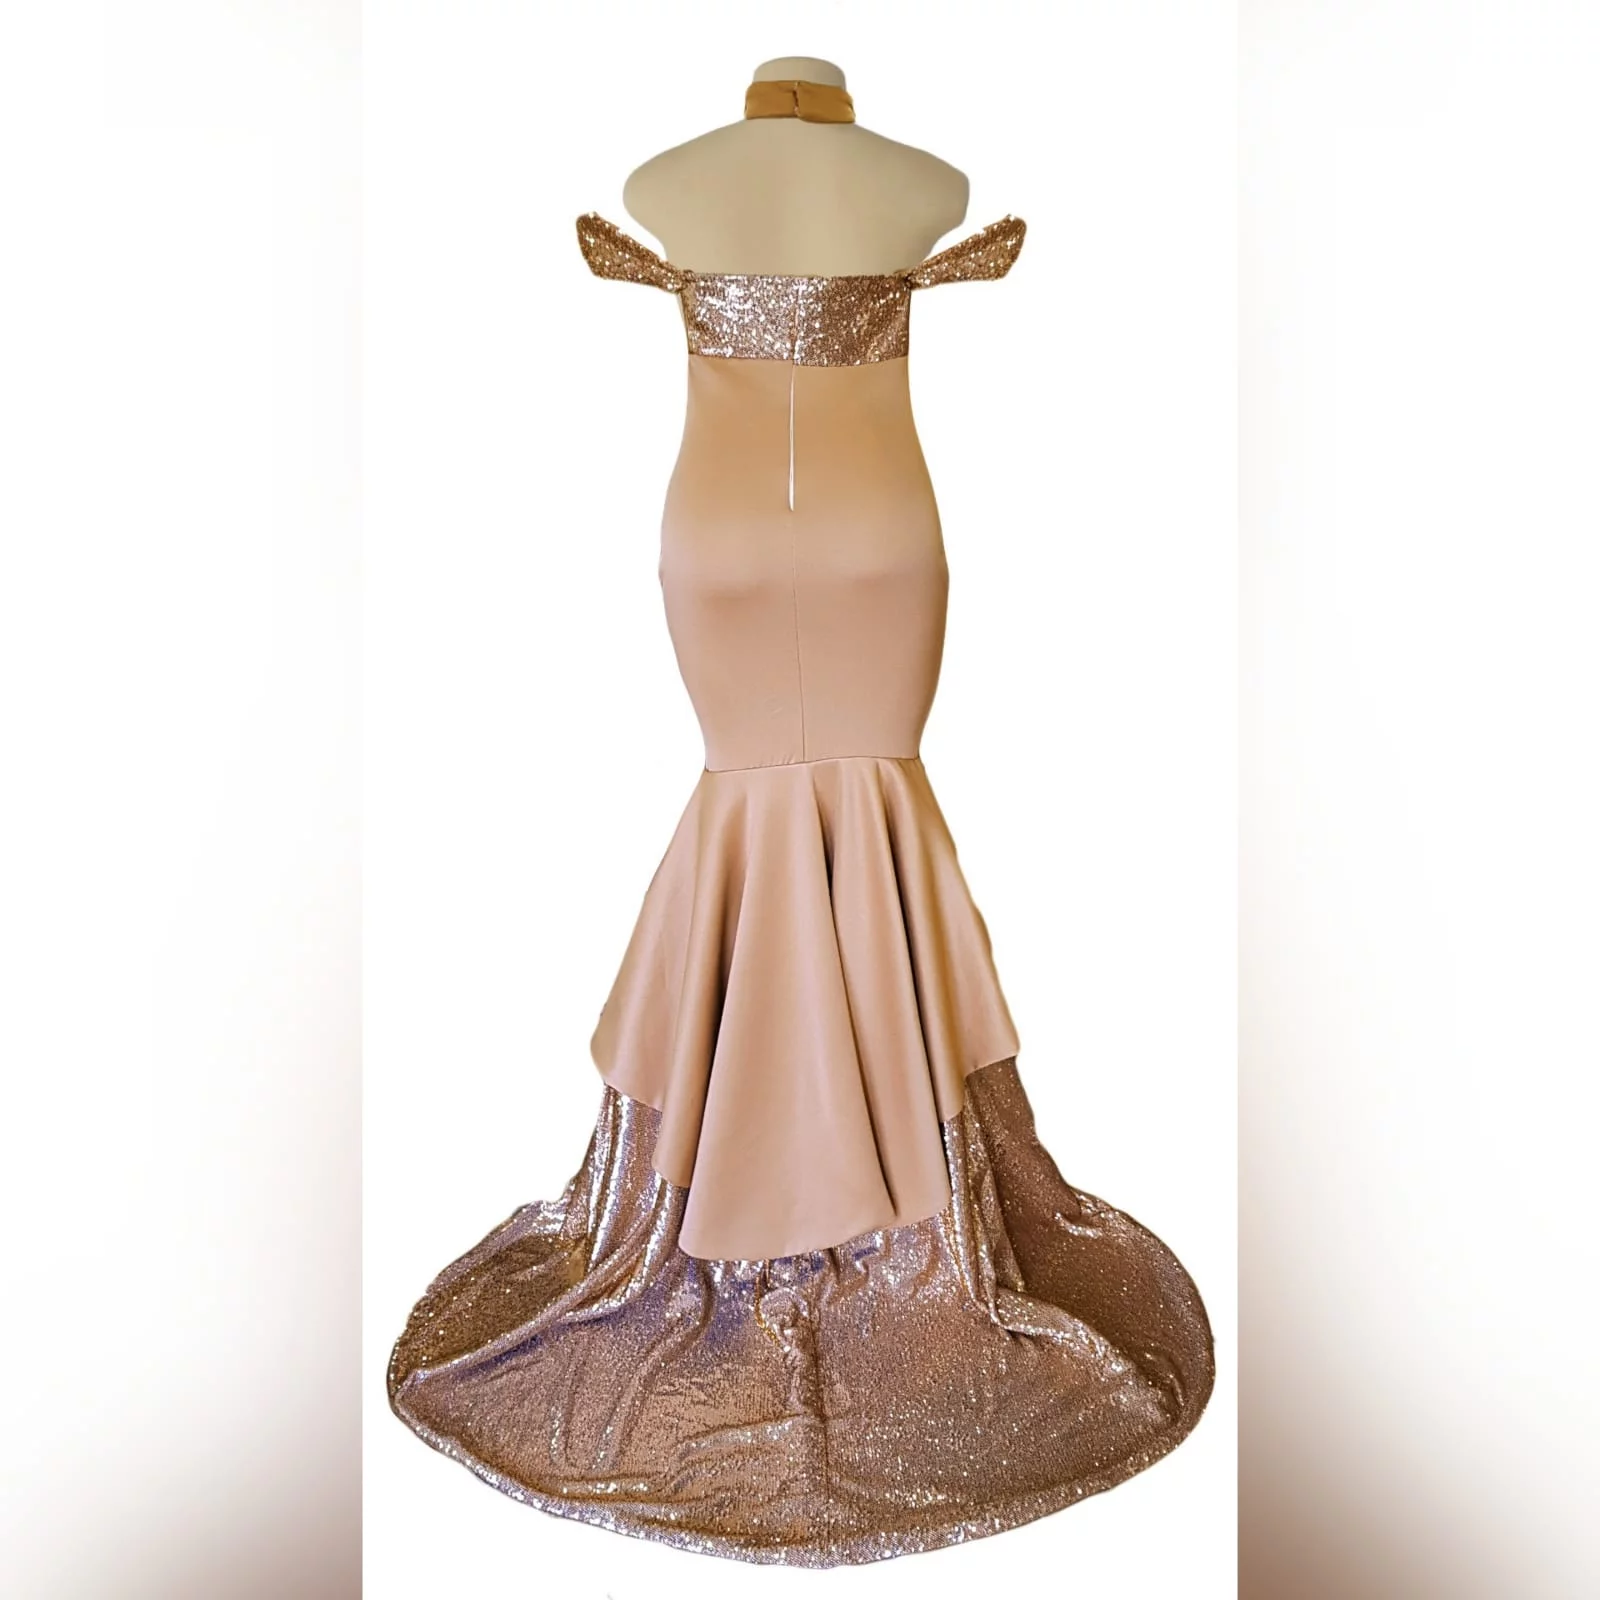 Rose gold 2 tone mermaid prom dress 6 rose gold 2 tone mermaid prom dress, off-shoulder dress with a sweetheart neckline and off-shoulder short sleeves. Double layer from knee down, with sequins, creating a train with a slit int the front middle. Comes with a matching choker.